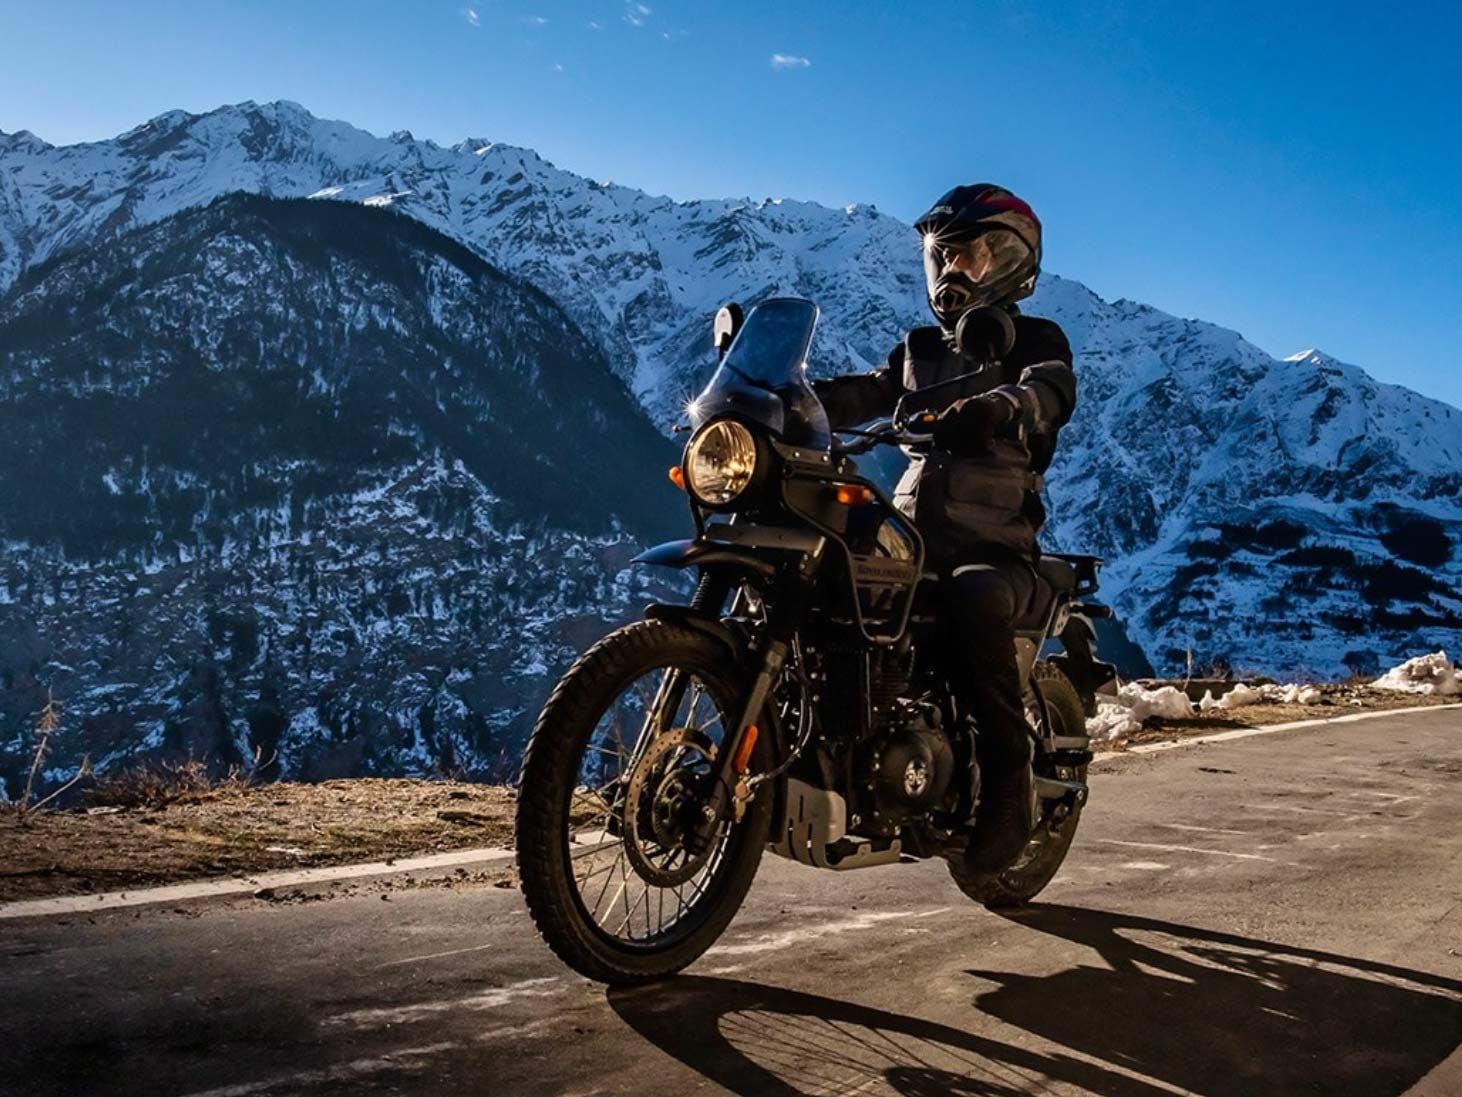 The Royal Enfield Himalayan has been providing entry-level adventure fun since 2017.